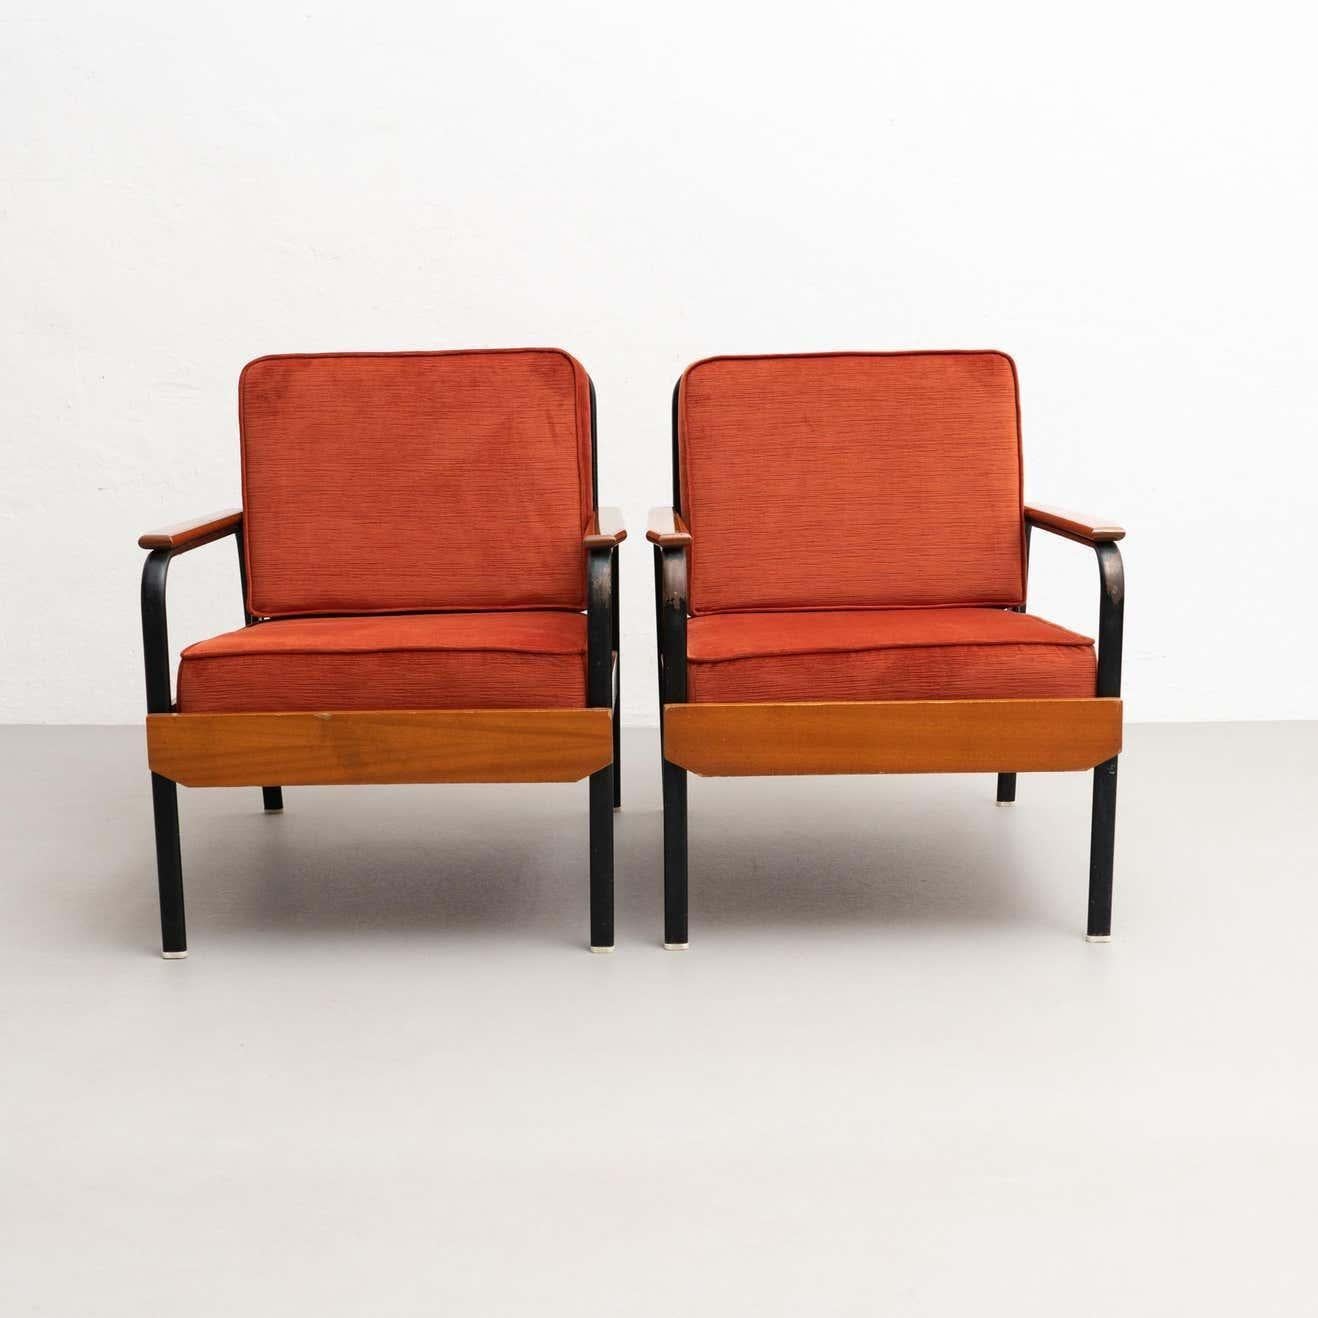 Mid-20th Century Set of Two After Jean Prouve French Mid-Century Modern Wood and Metal Chairs For Sale